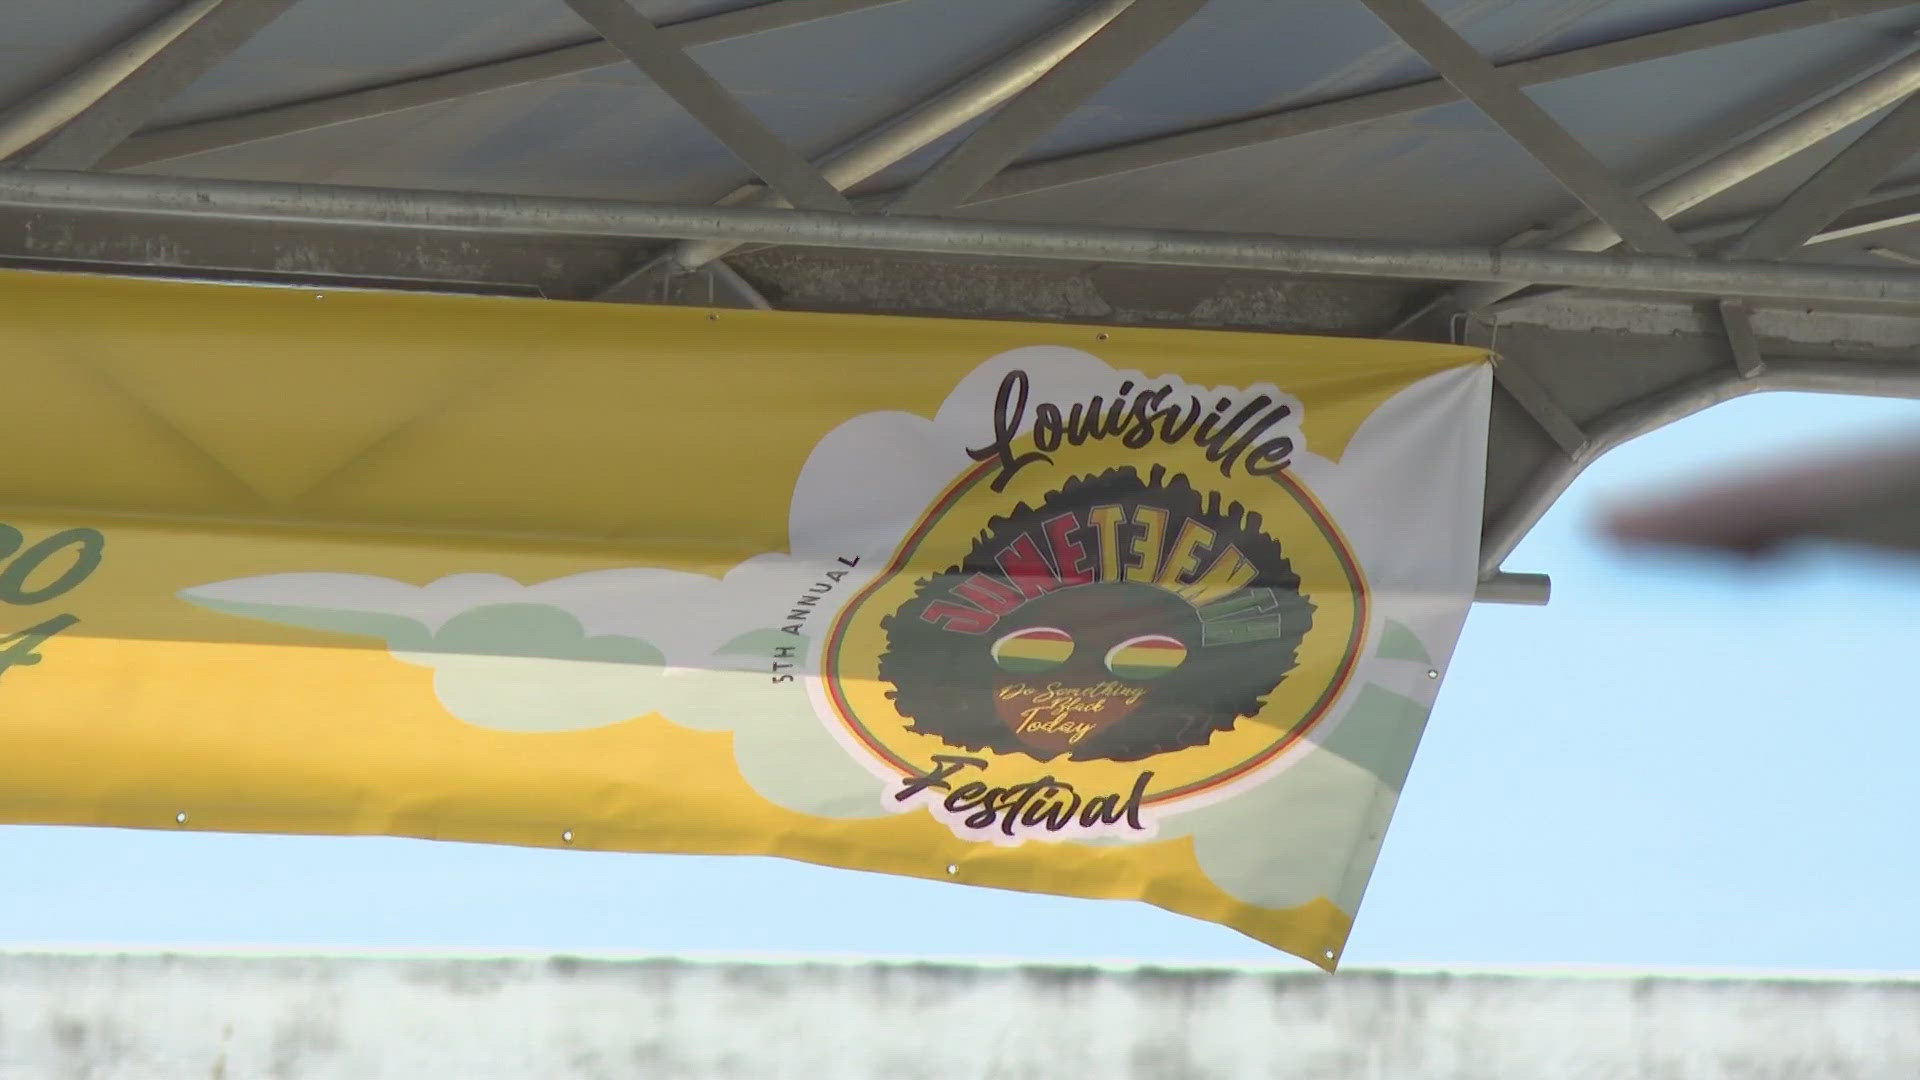 Lynn Family Stadium and Jeffersonville, Indiana hosted events to mark the anniversary of Juneteenth.